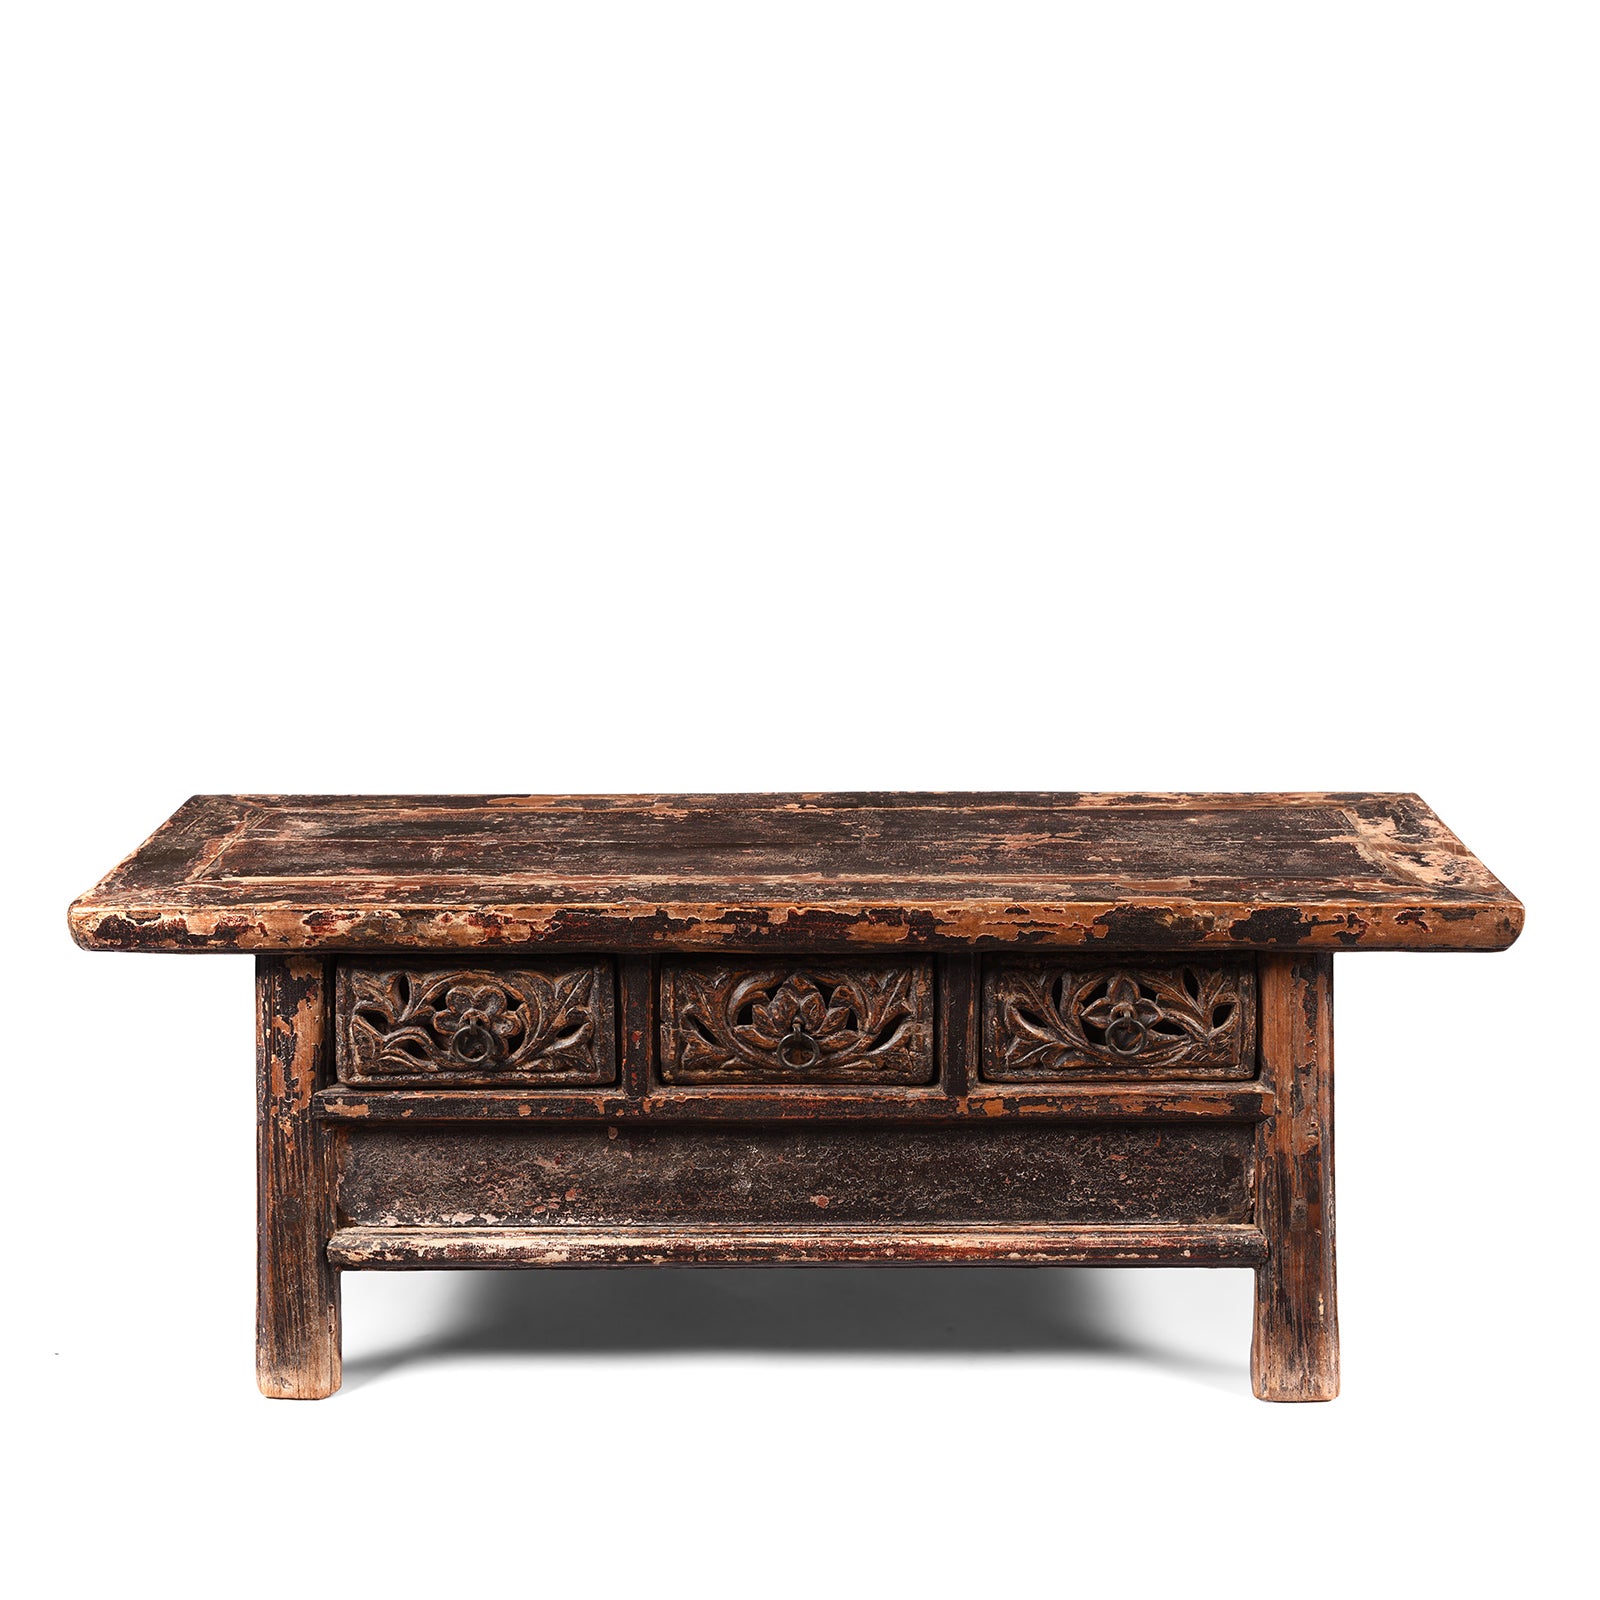 Antique Elm Kang Table From Shanxi  - 19th Century | Indigo Antiques